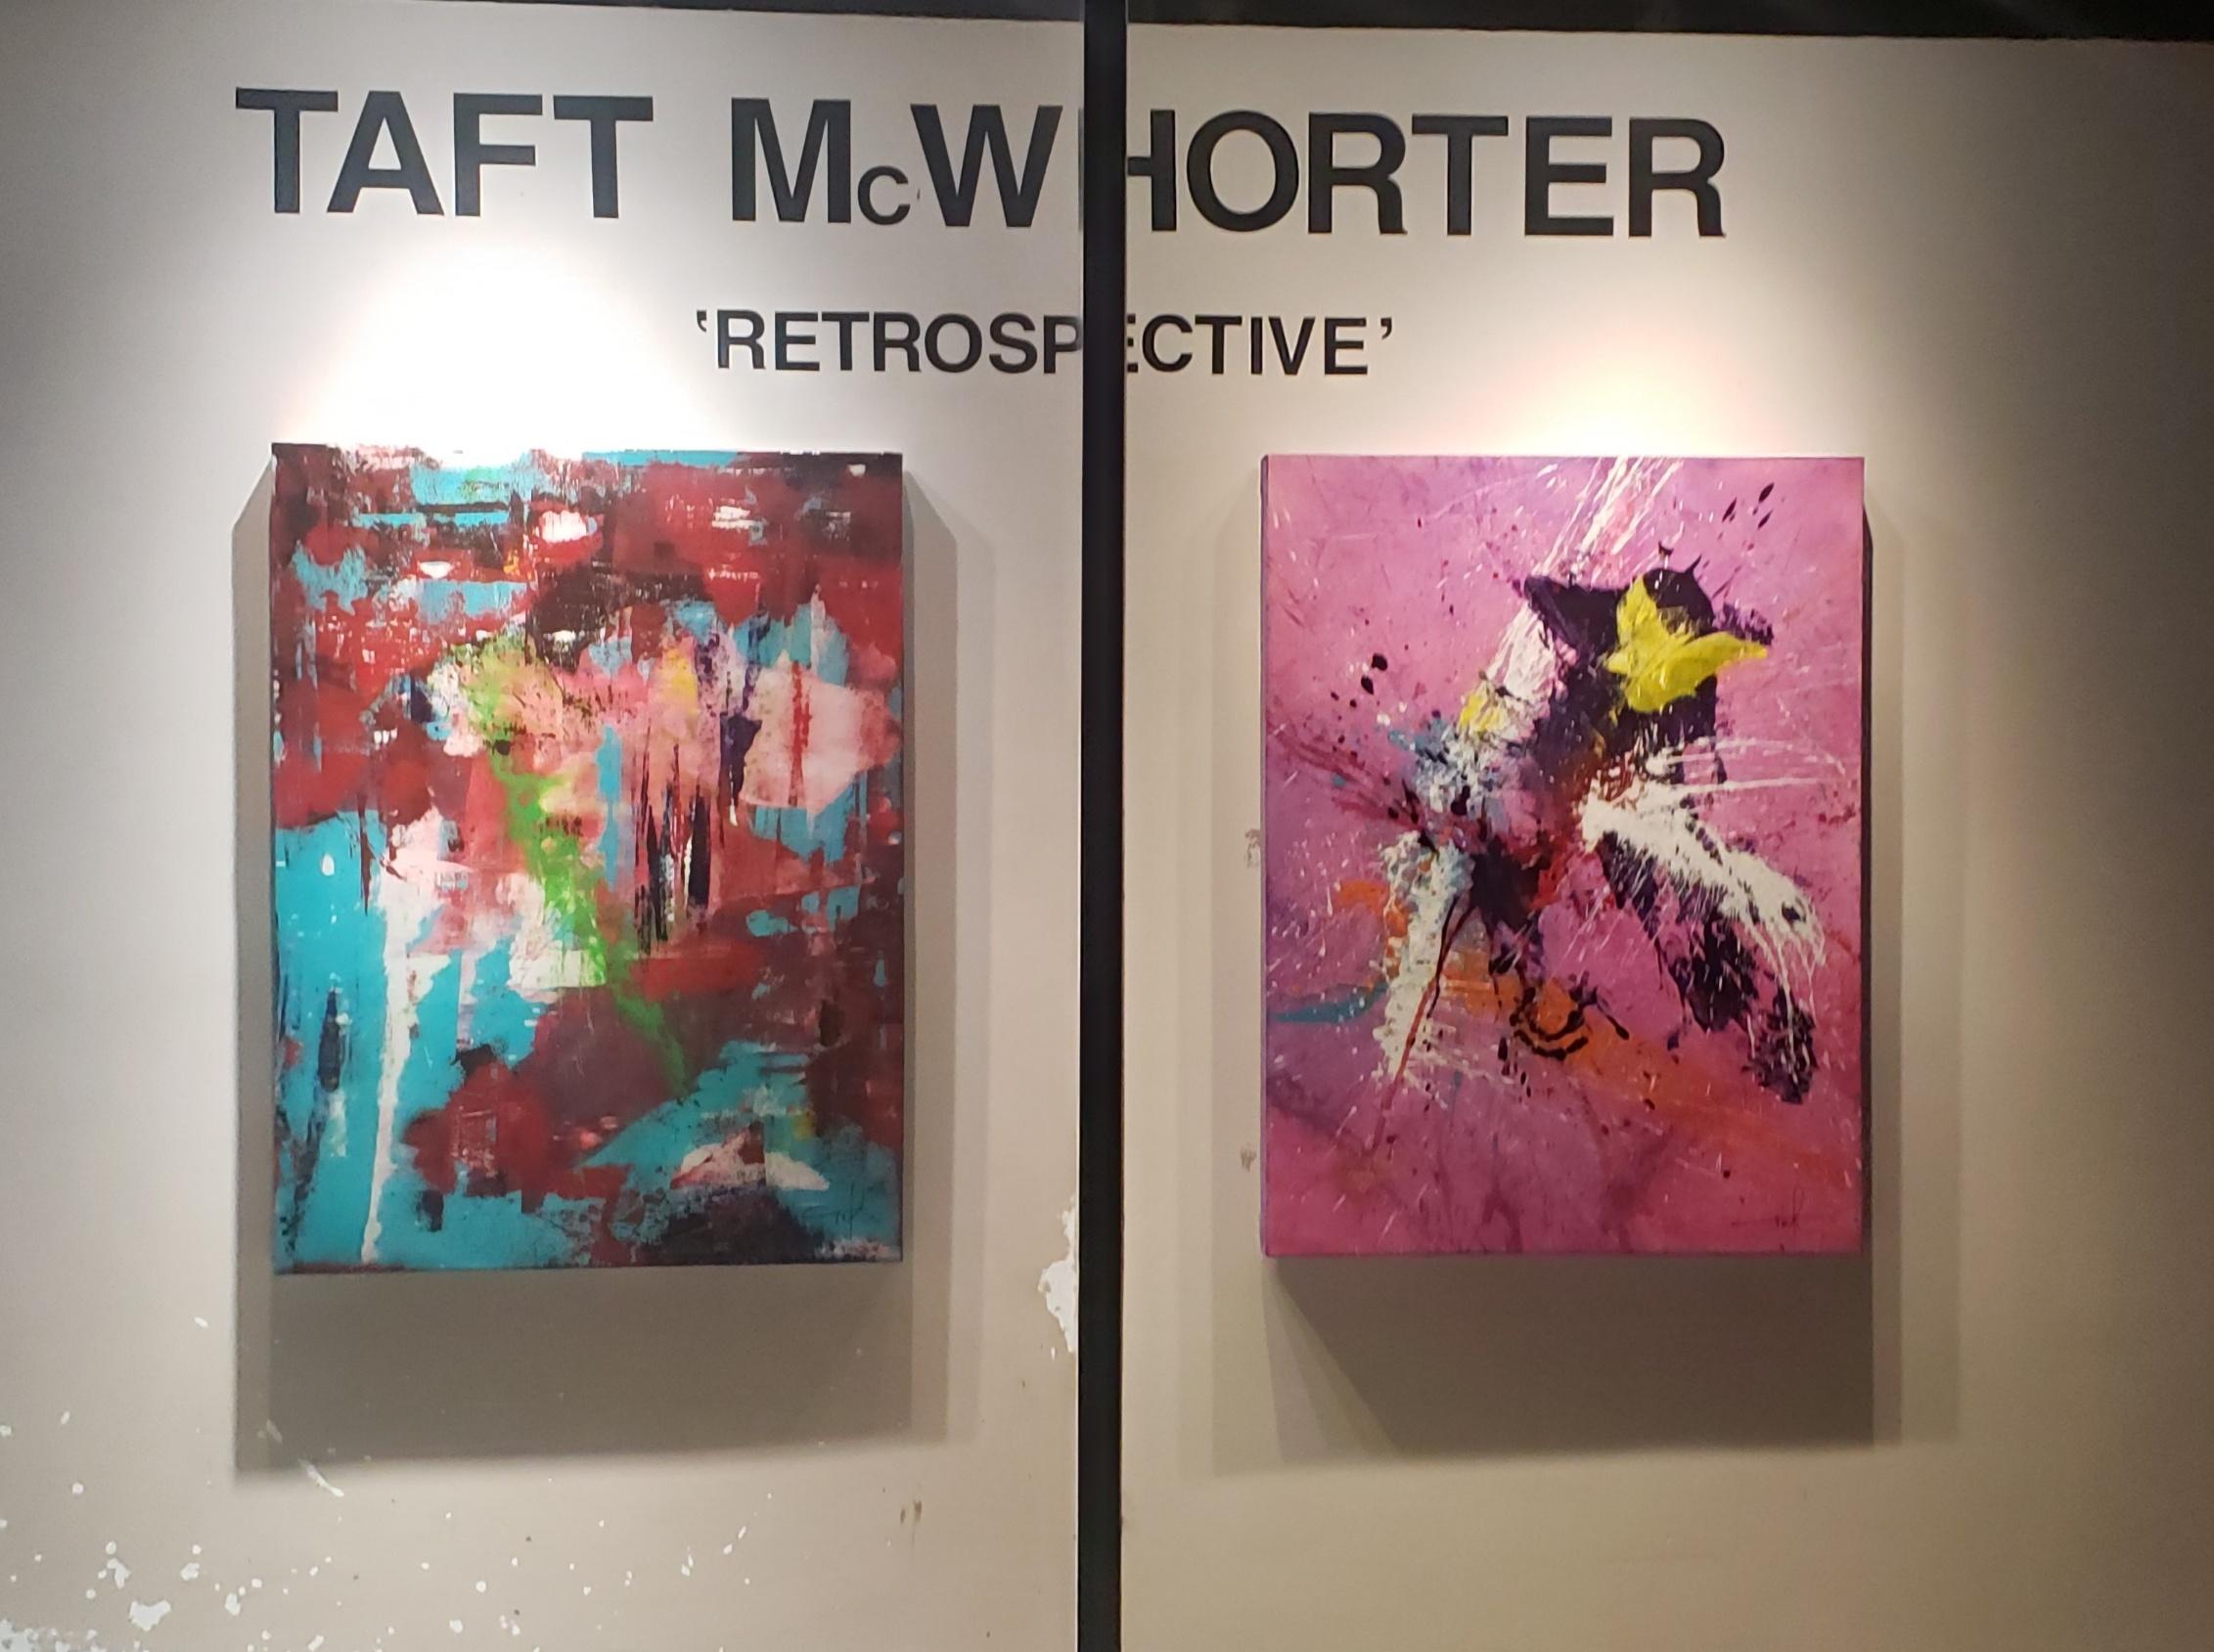 SEE ISTDIBS SPECIAL OFFER FOR FREE SHIPPING AT CHECKOUT

Taft McWhorter is a minimalist at heart. Even though  the majority of his work is very colorful and busy, the Puremo series is the artwork that Taft McWhorter creates to tap into that